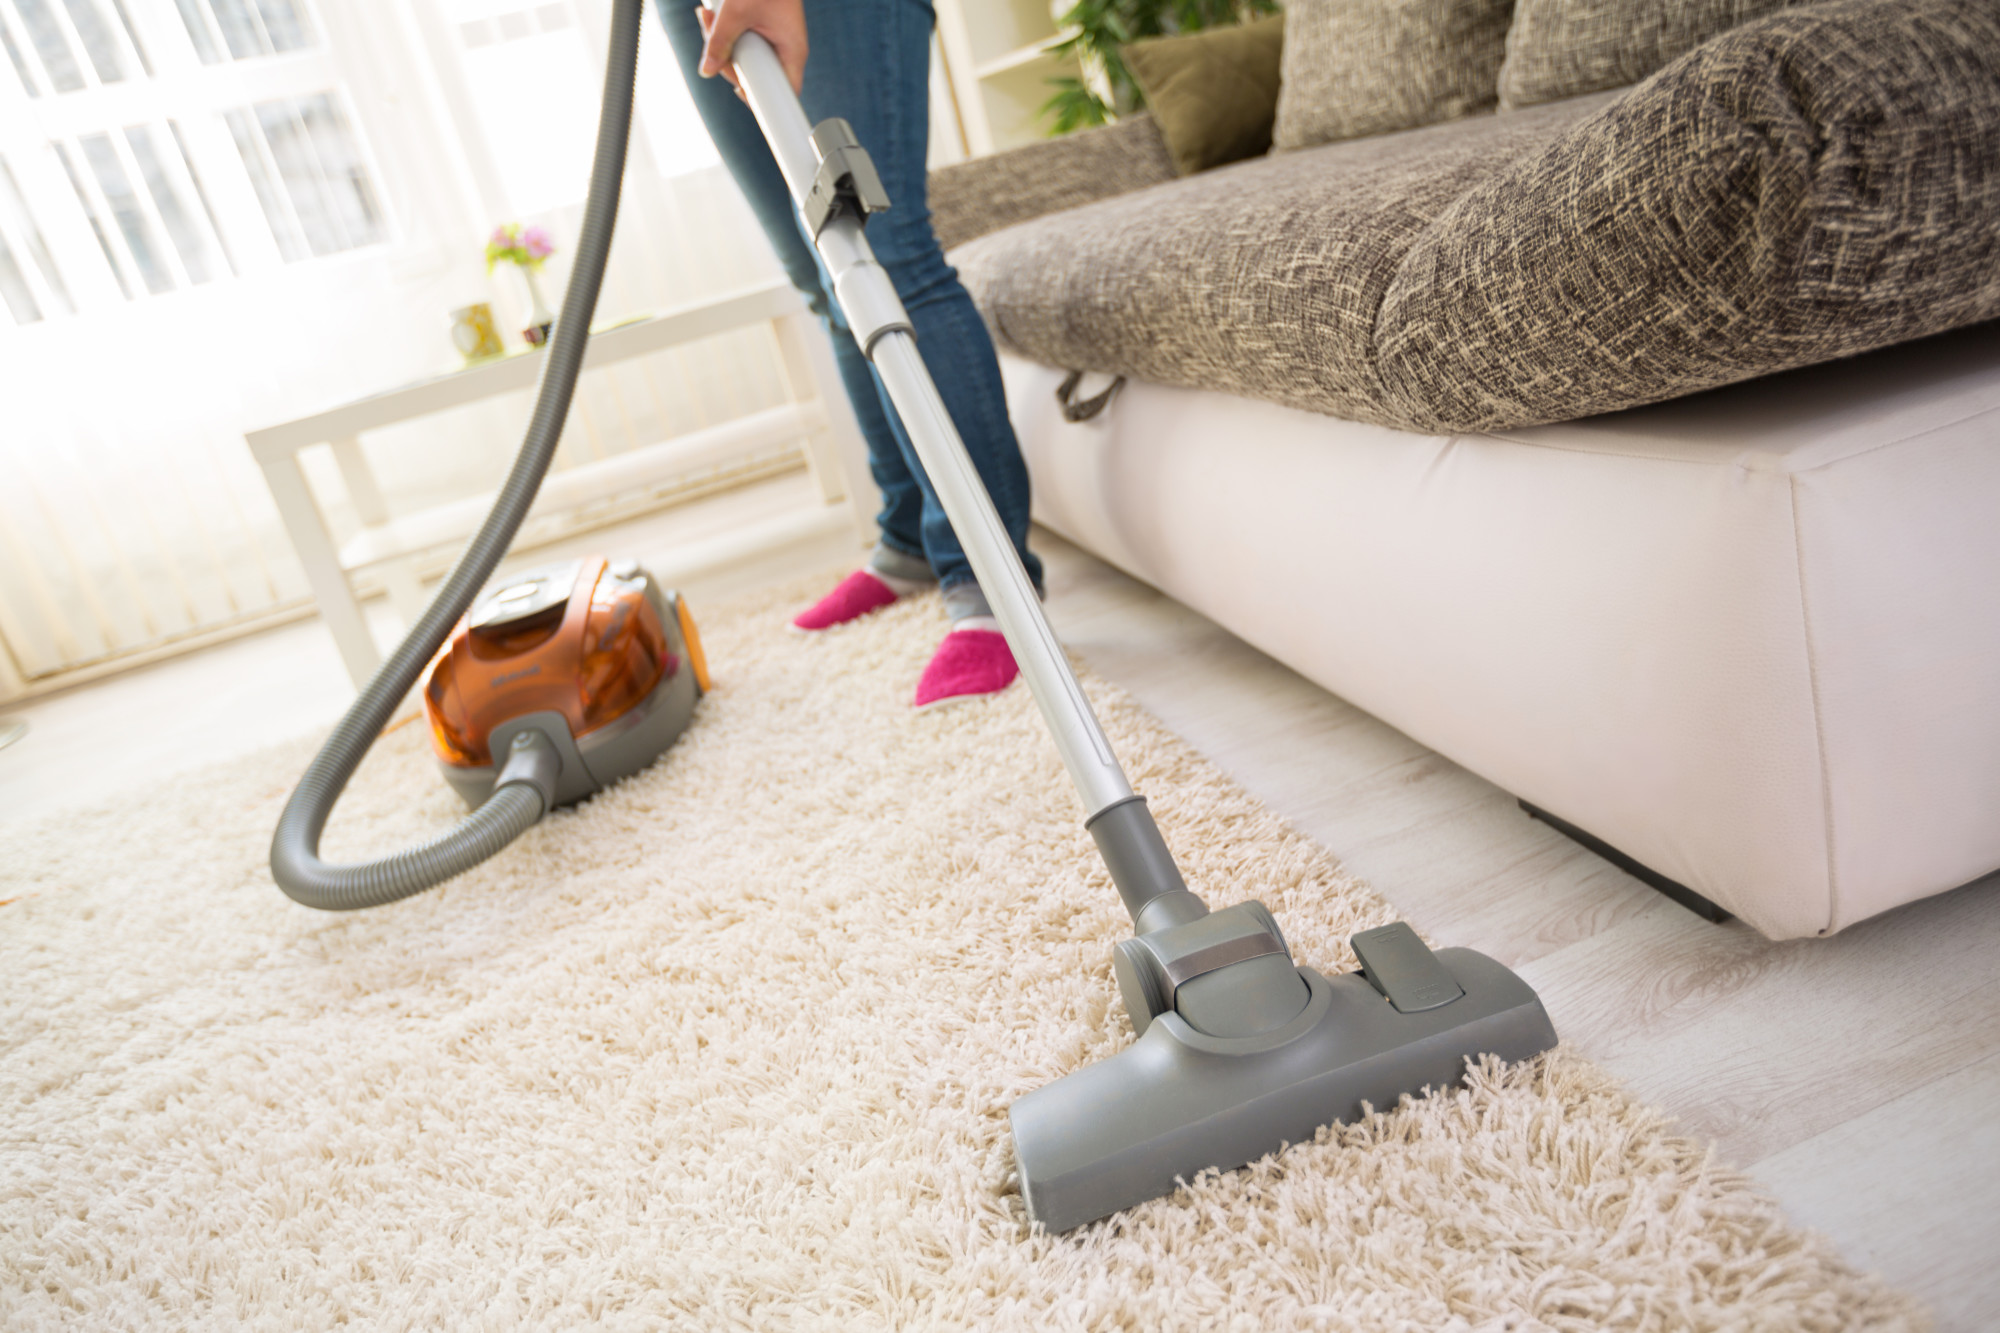 The Deep Clean: Carpet Cleaning For Allergies -